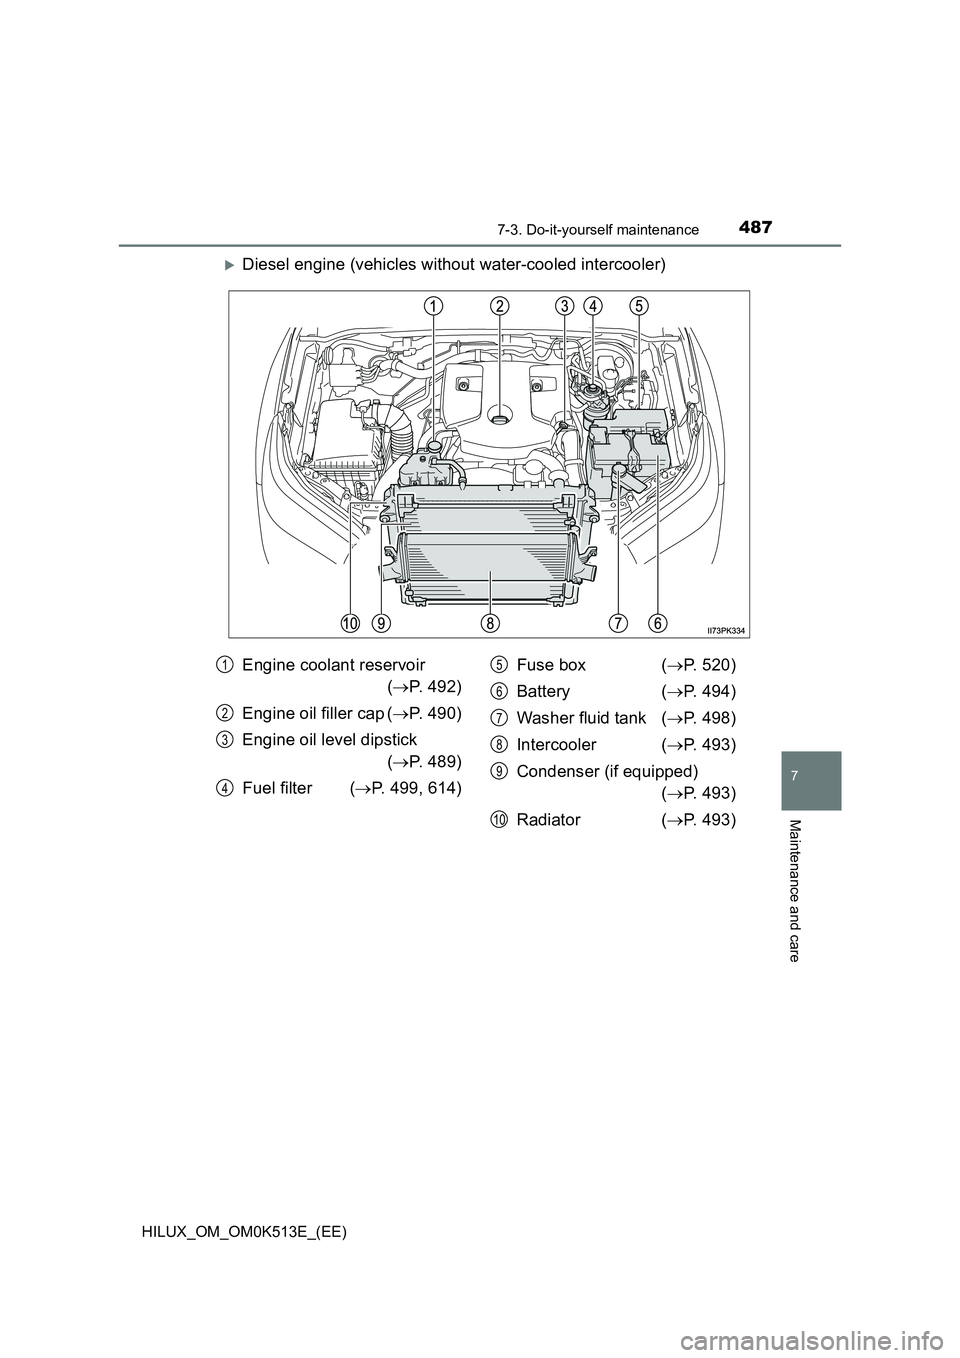 TOYOTA HILUX 2021  Owners Manual (in English) 4877-3. Do-it-yourself maintenance
HILUX_OM_OM0K513E_(EE)
7
Maintenance and care
Diesel engine (vehicles without water-cooled intercooler)
Engine coolant reservoir  
( P. 492) 
Engine oil filler